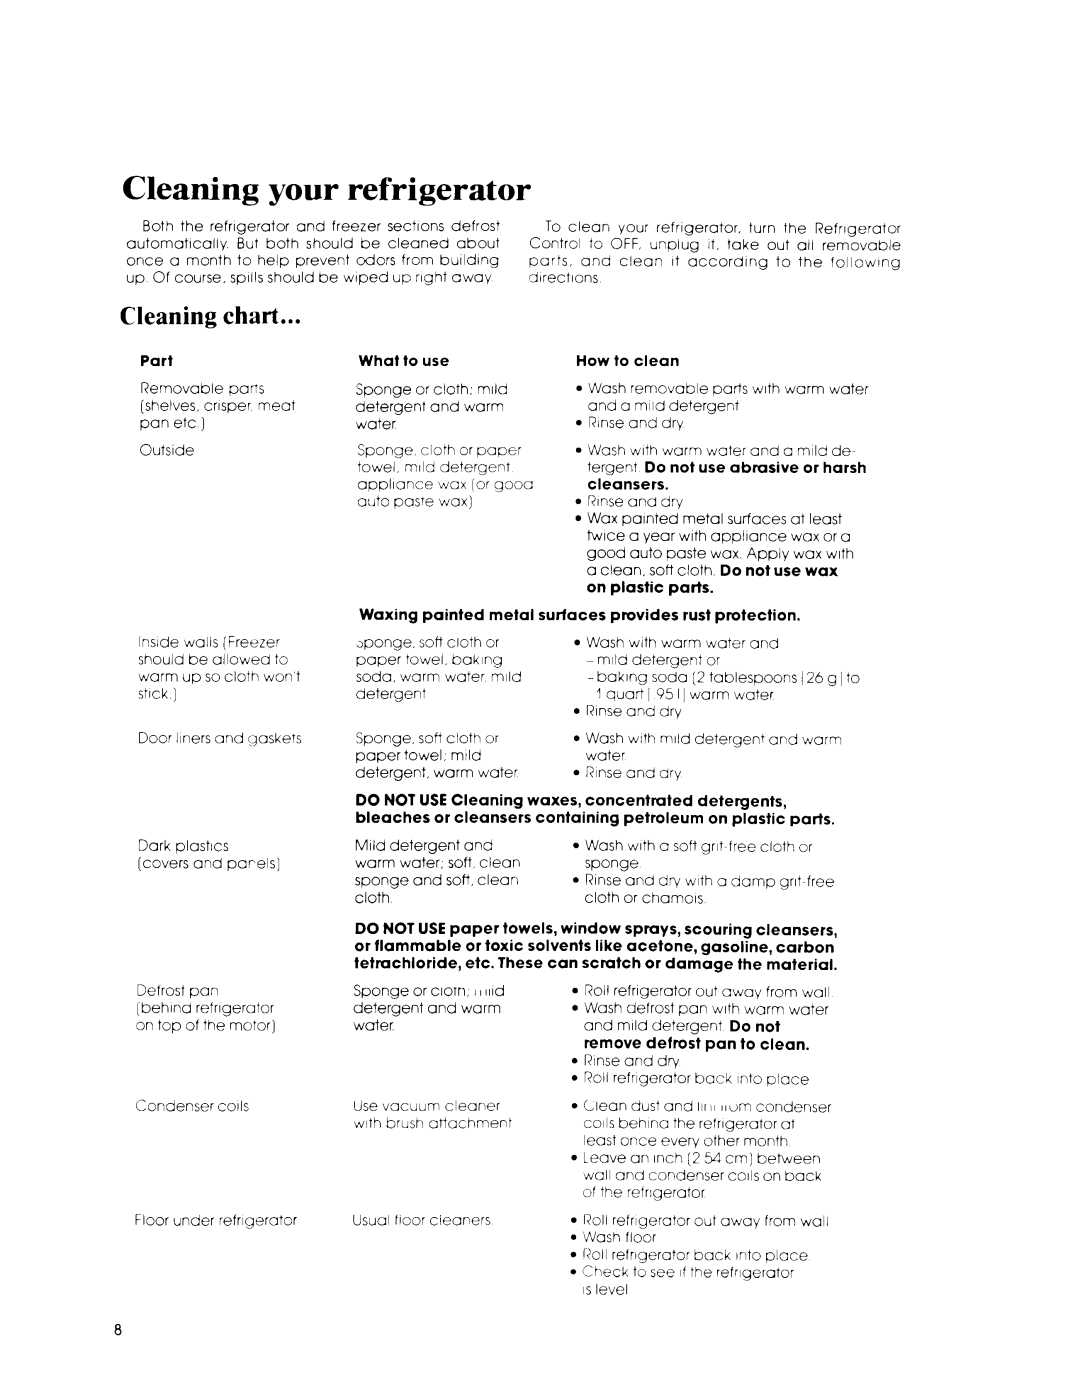 Whirlpool ET1NK manual Cleaning your refrigerator, Cleaning chart 